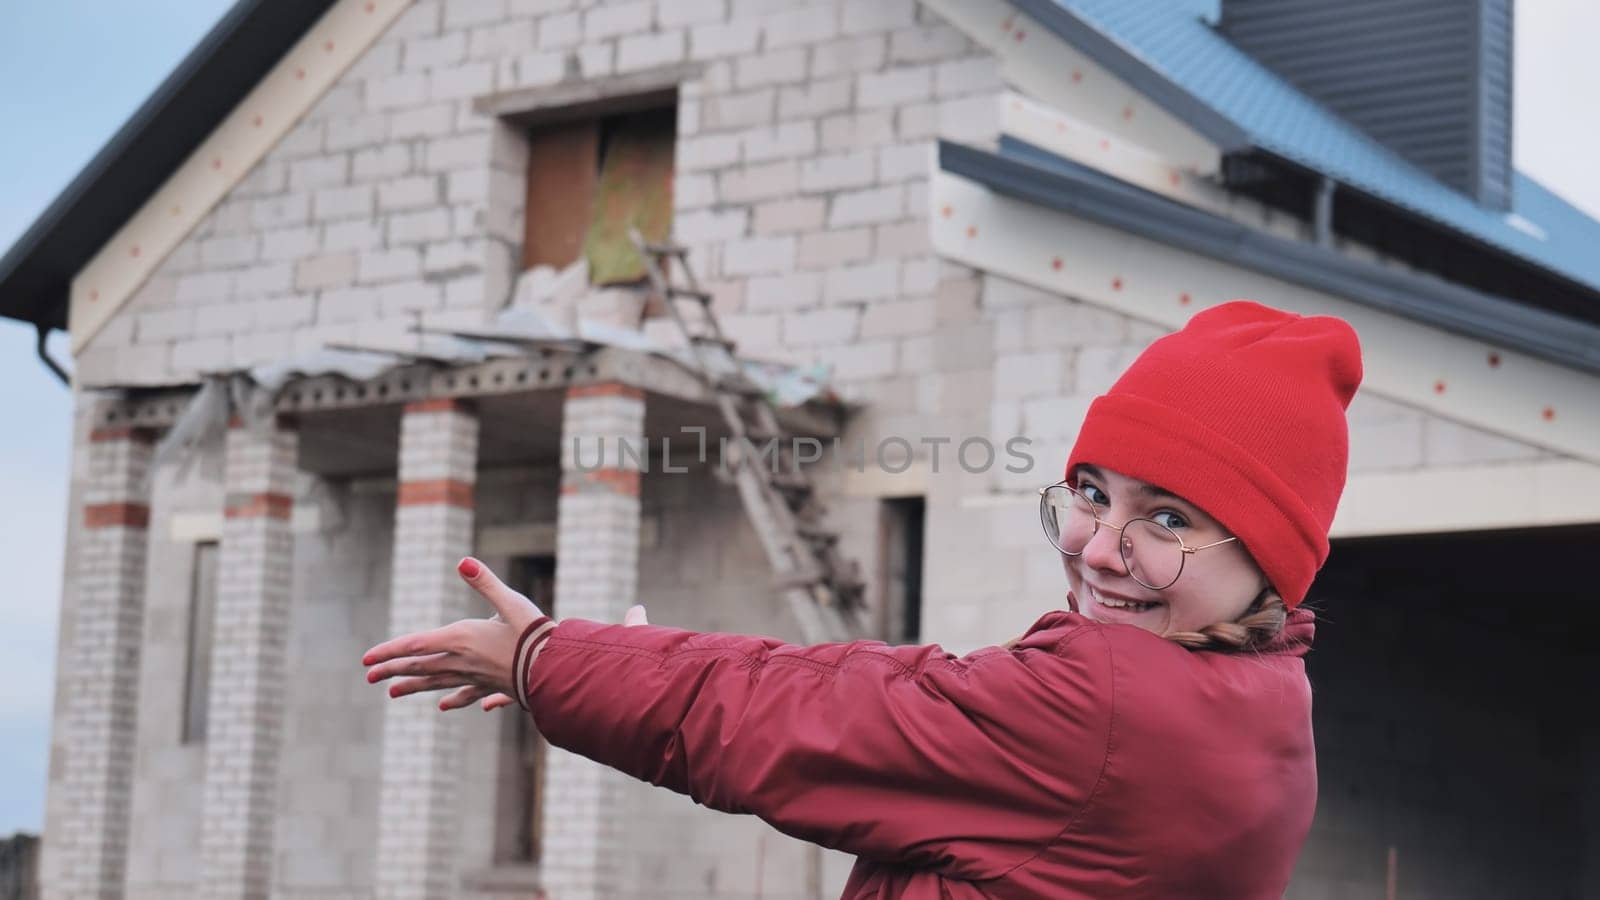 The girl is excited about building her future home. by DovidPro